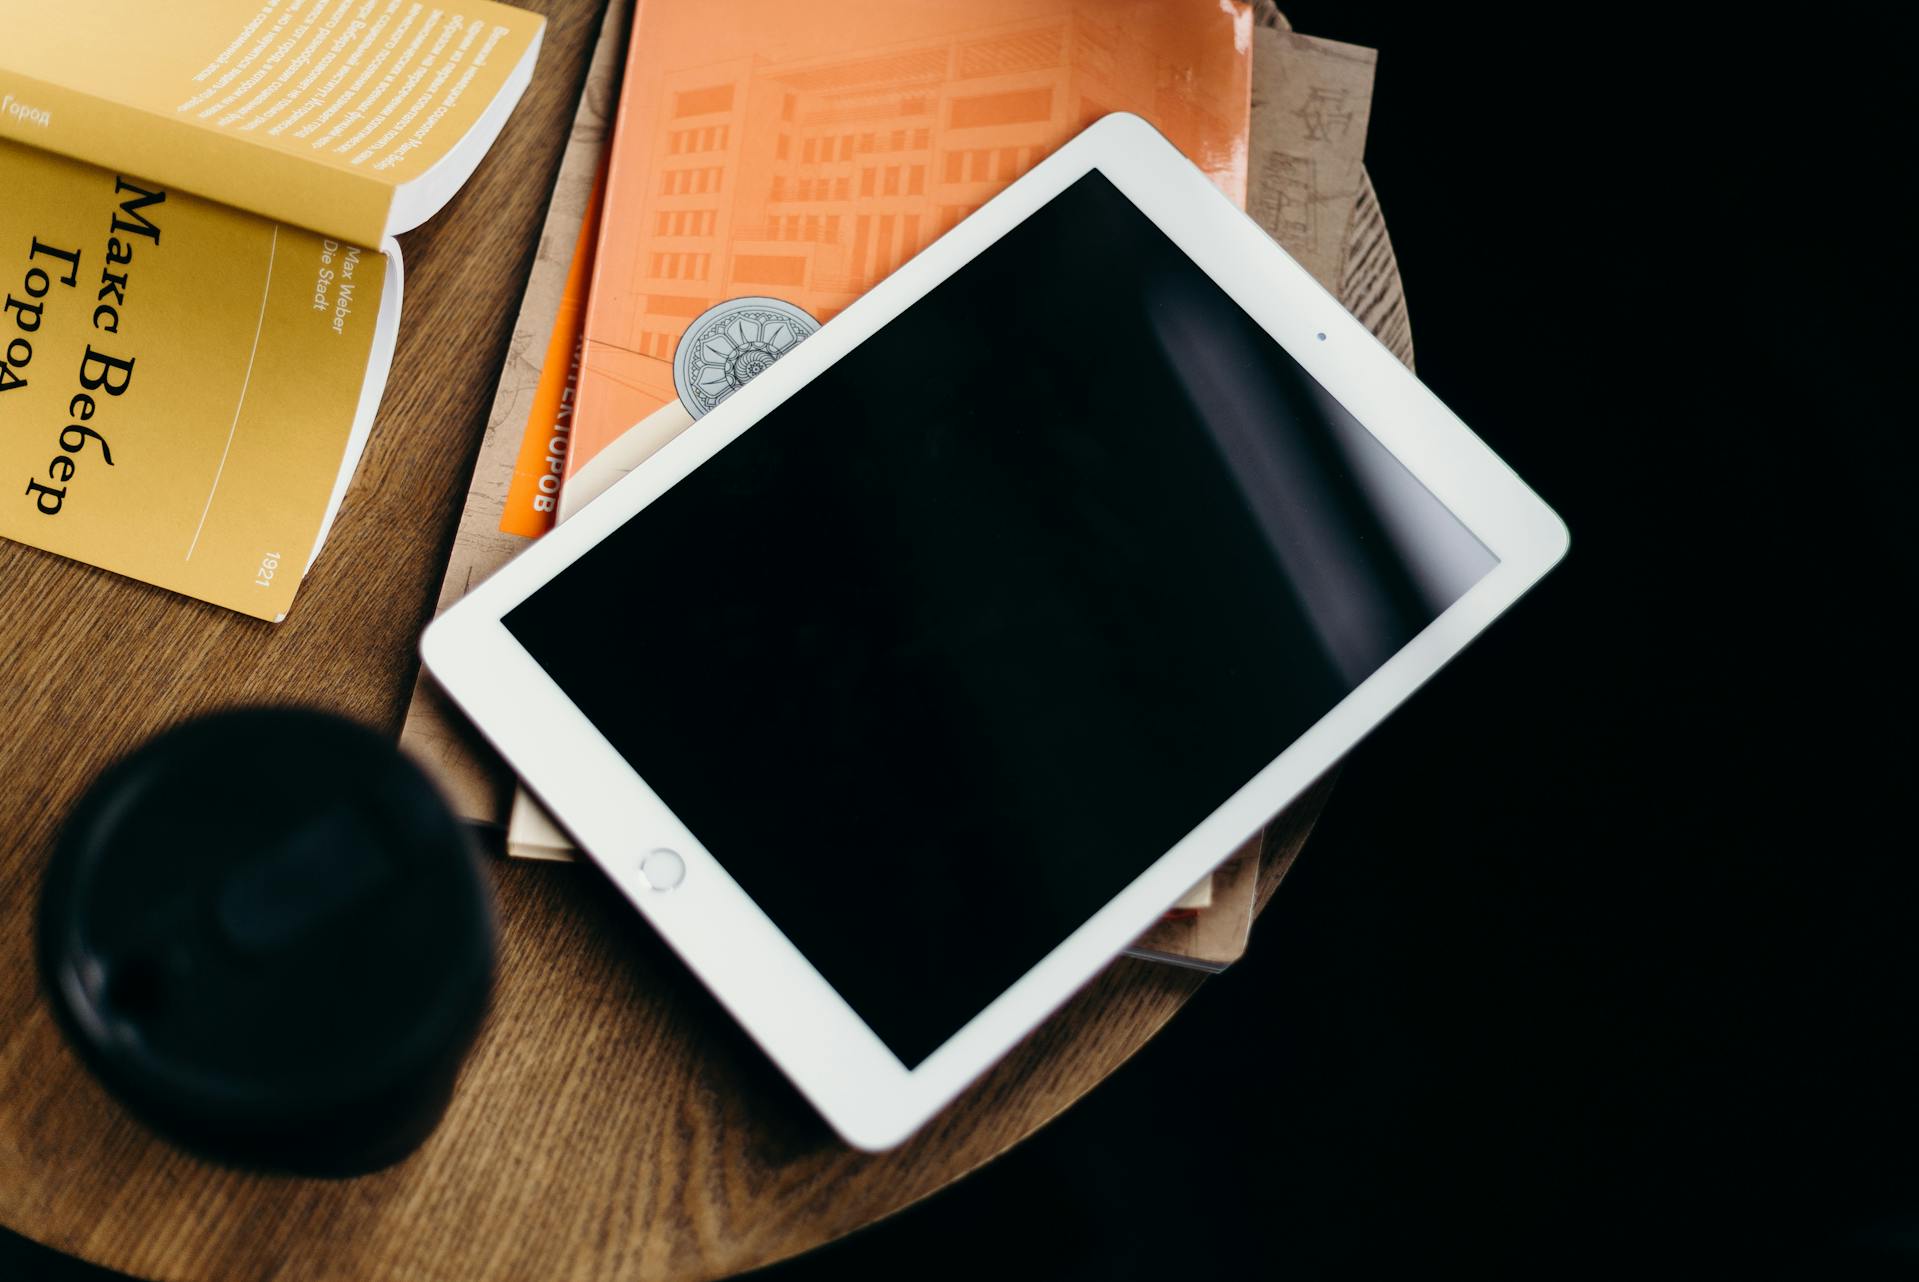 A white iPad on a brown table | Source: Pexels